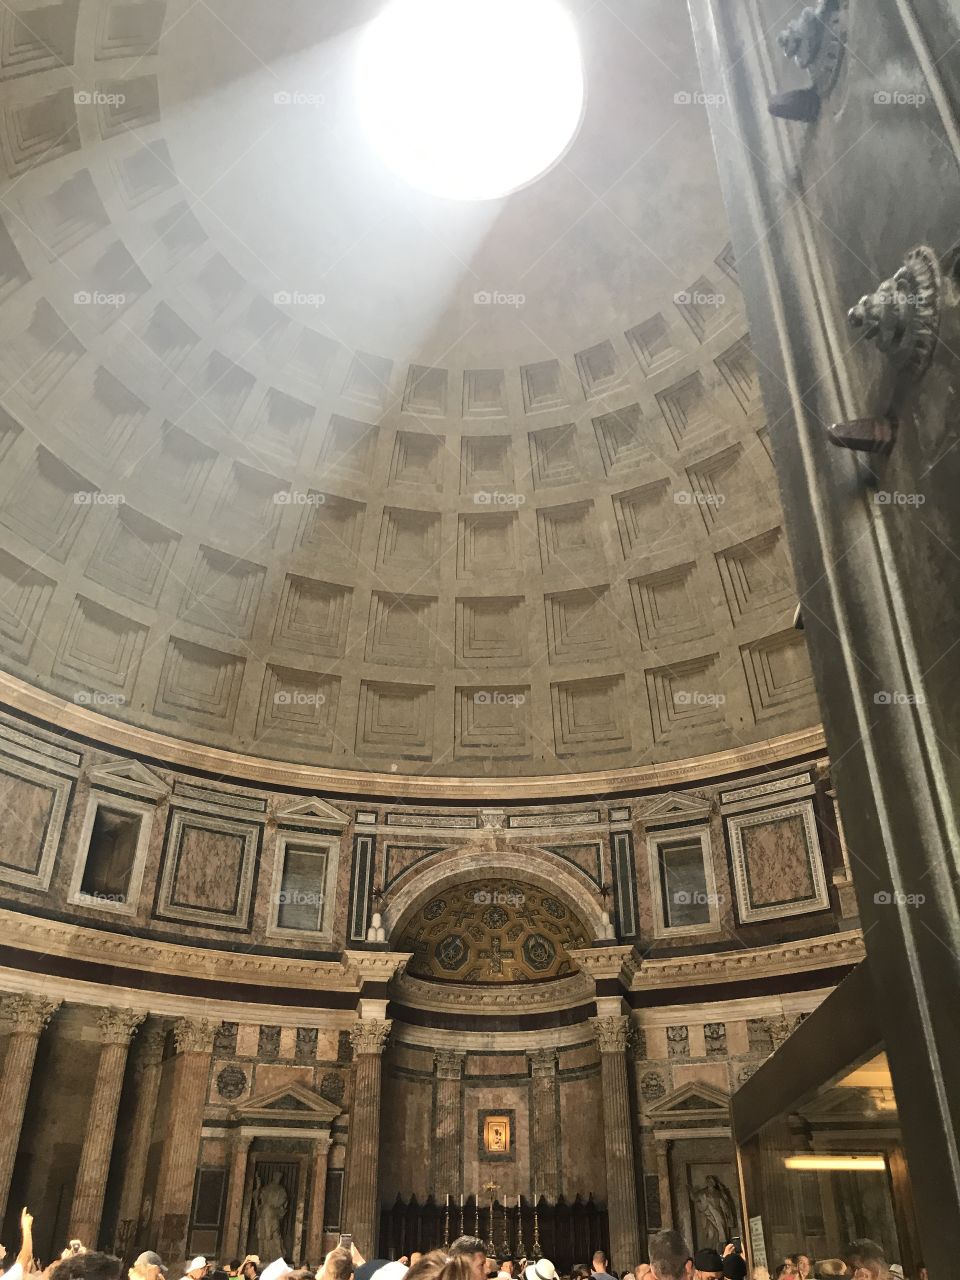 The glorious and ancient Pantheon in Rome, Italy